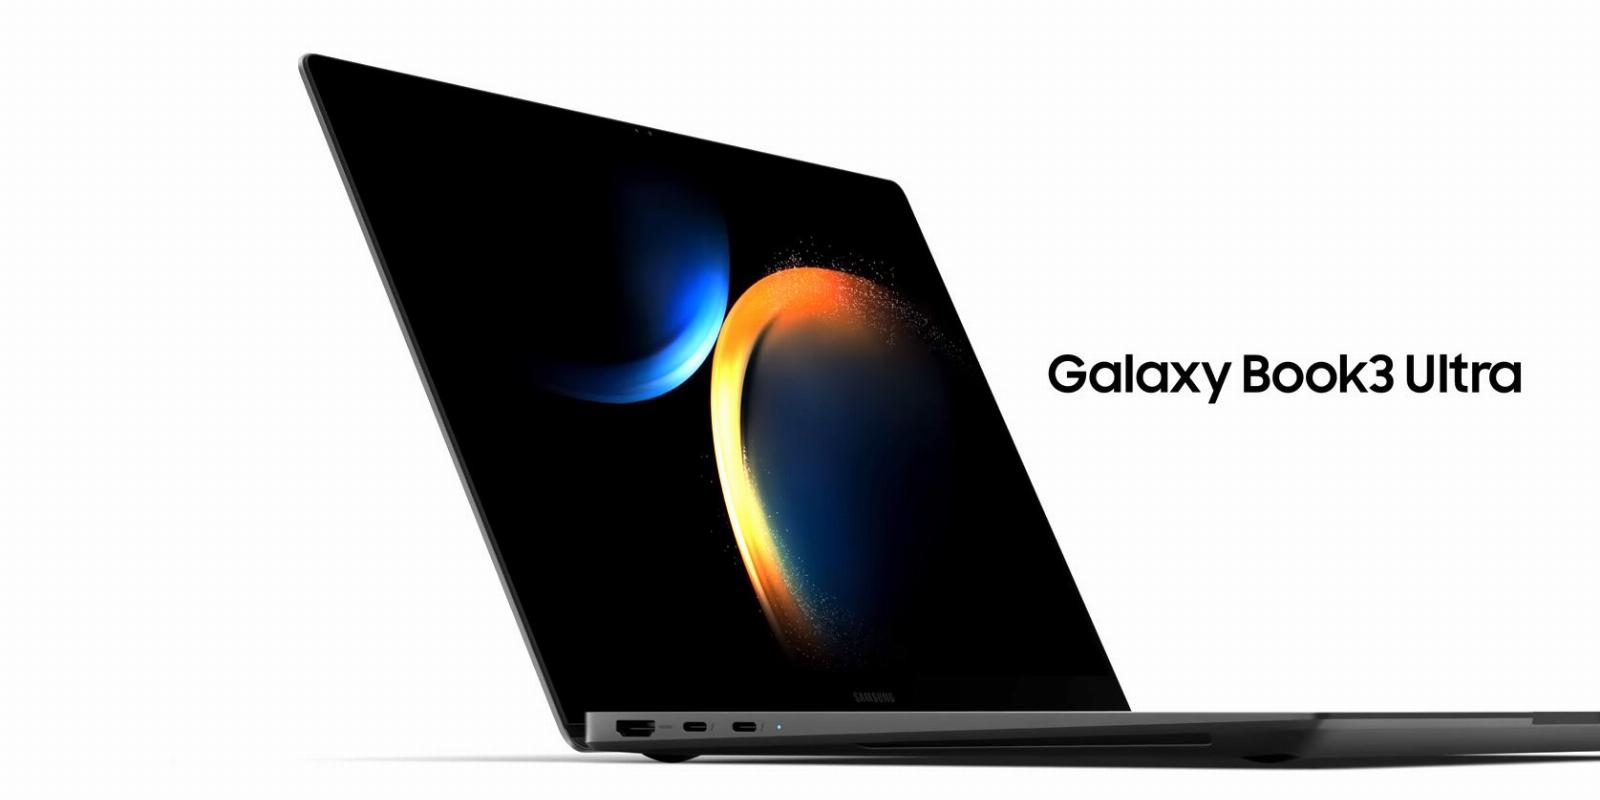 Samsung Announces the Galaxy Book3 Ultra for Those With Deep Pockets